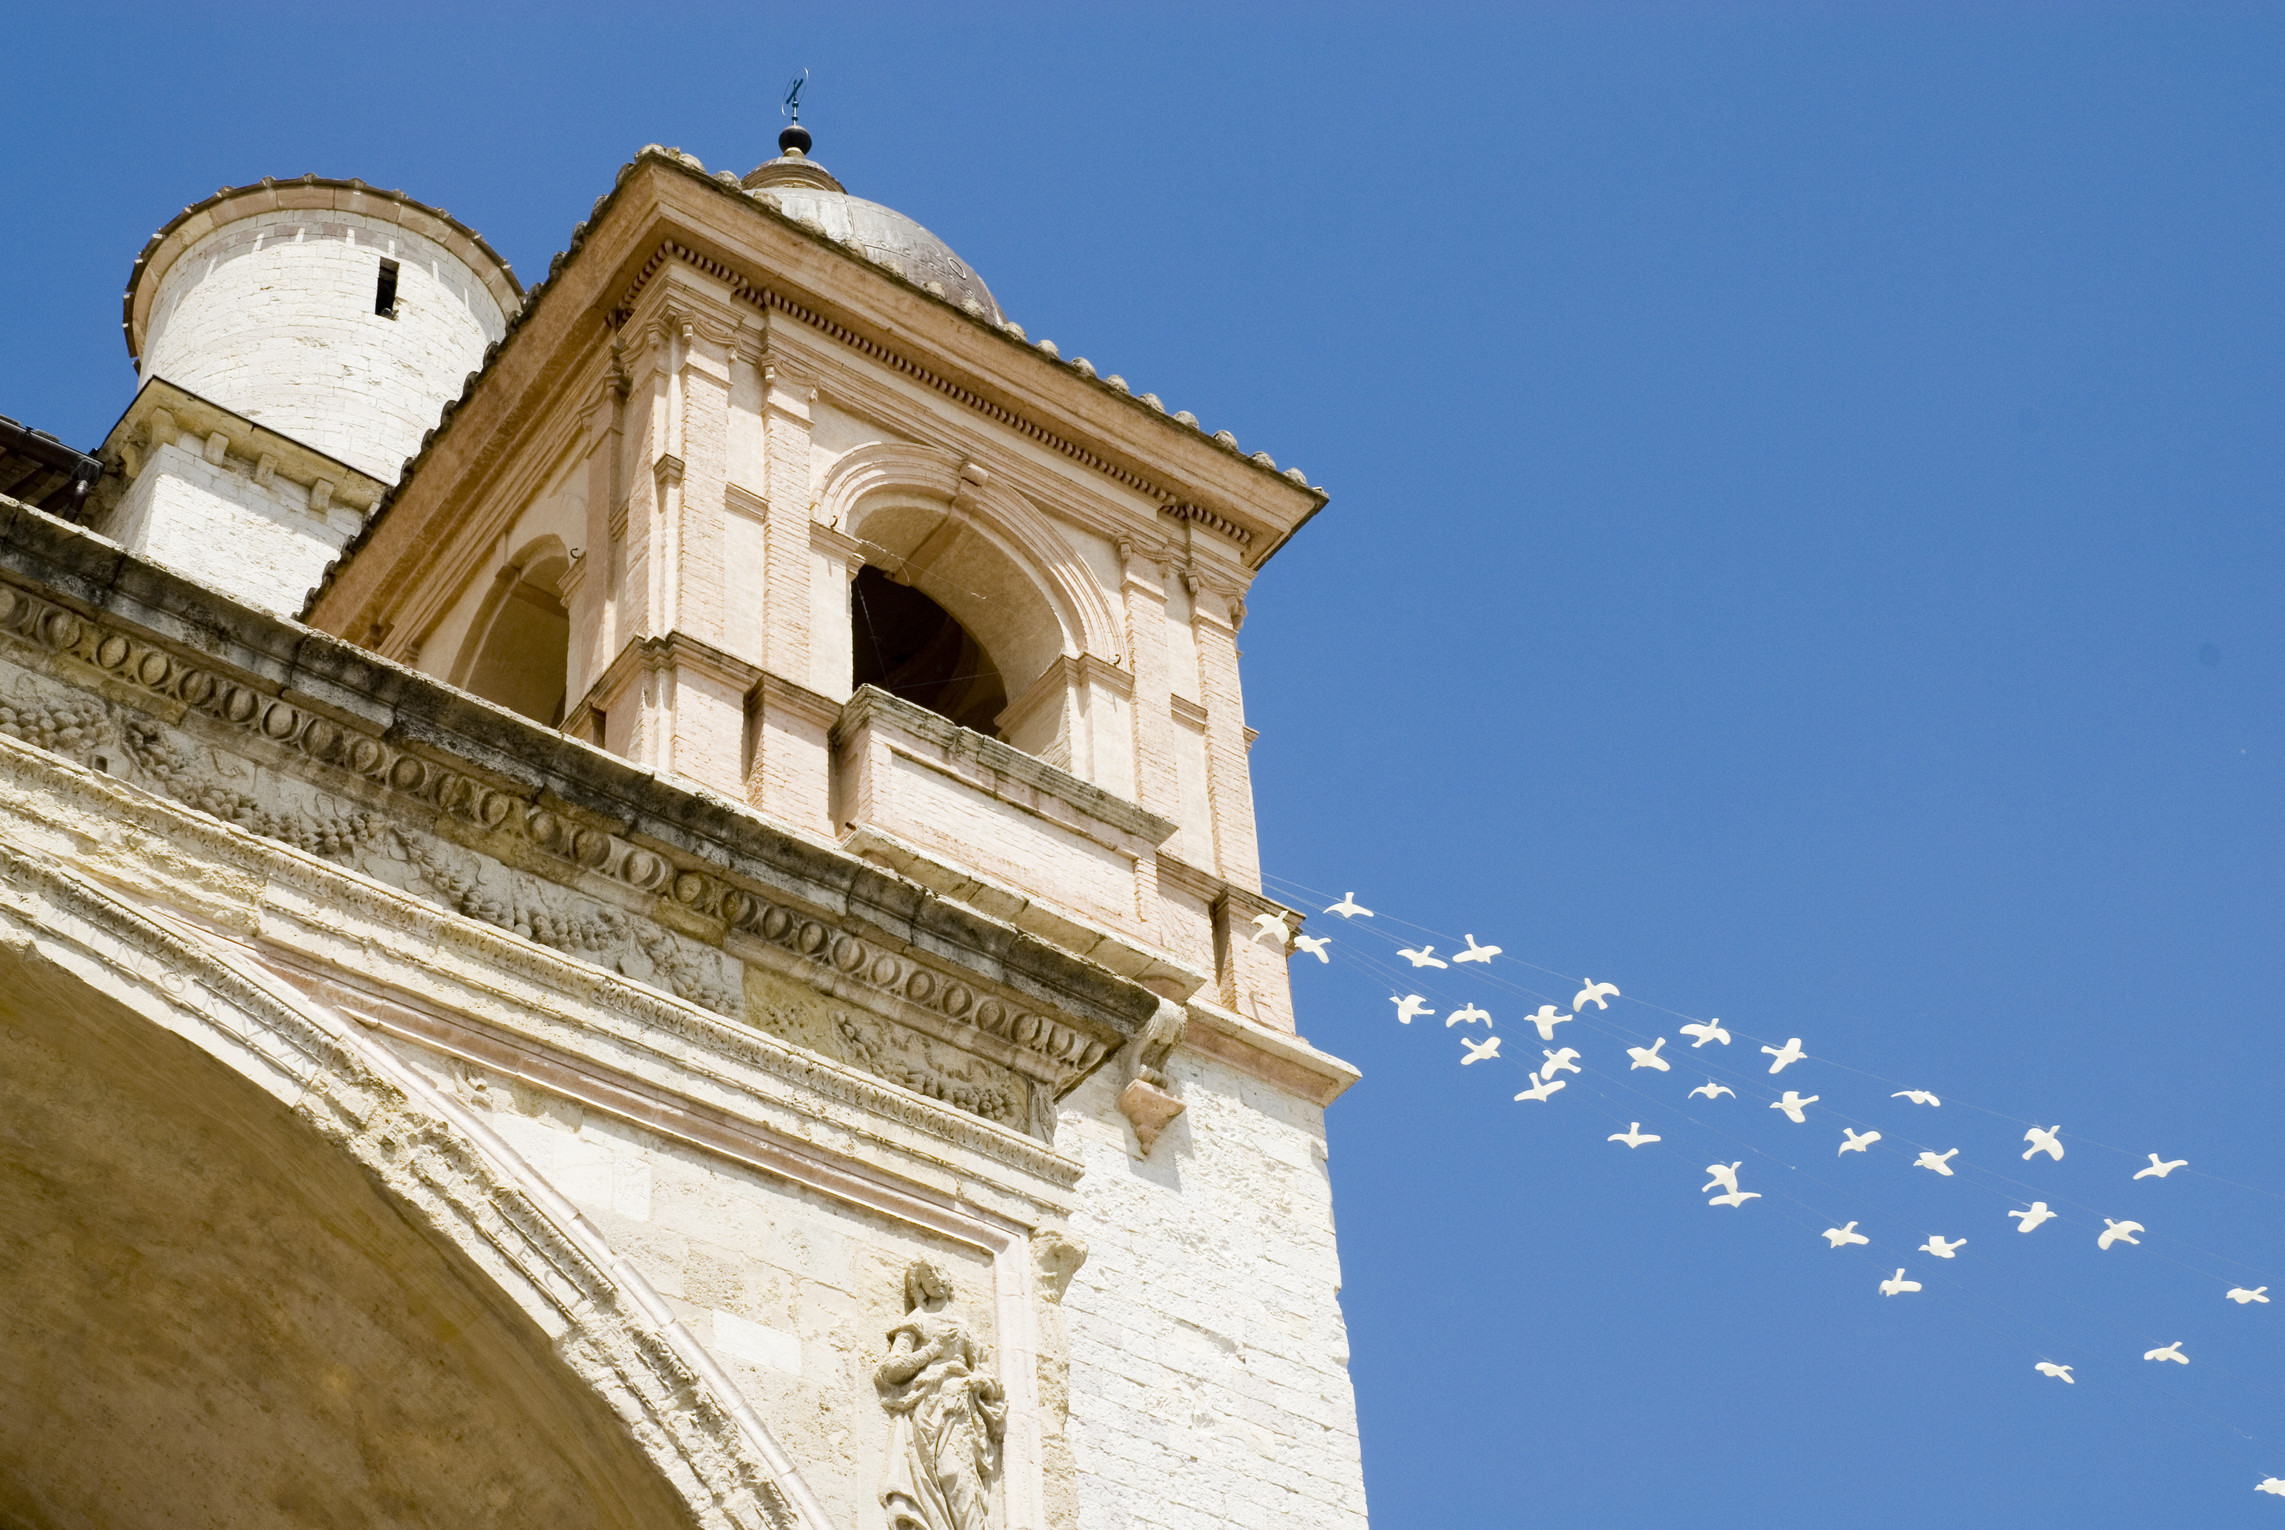 doves flying out of the basilica